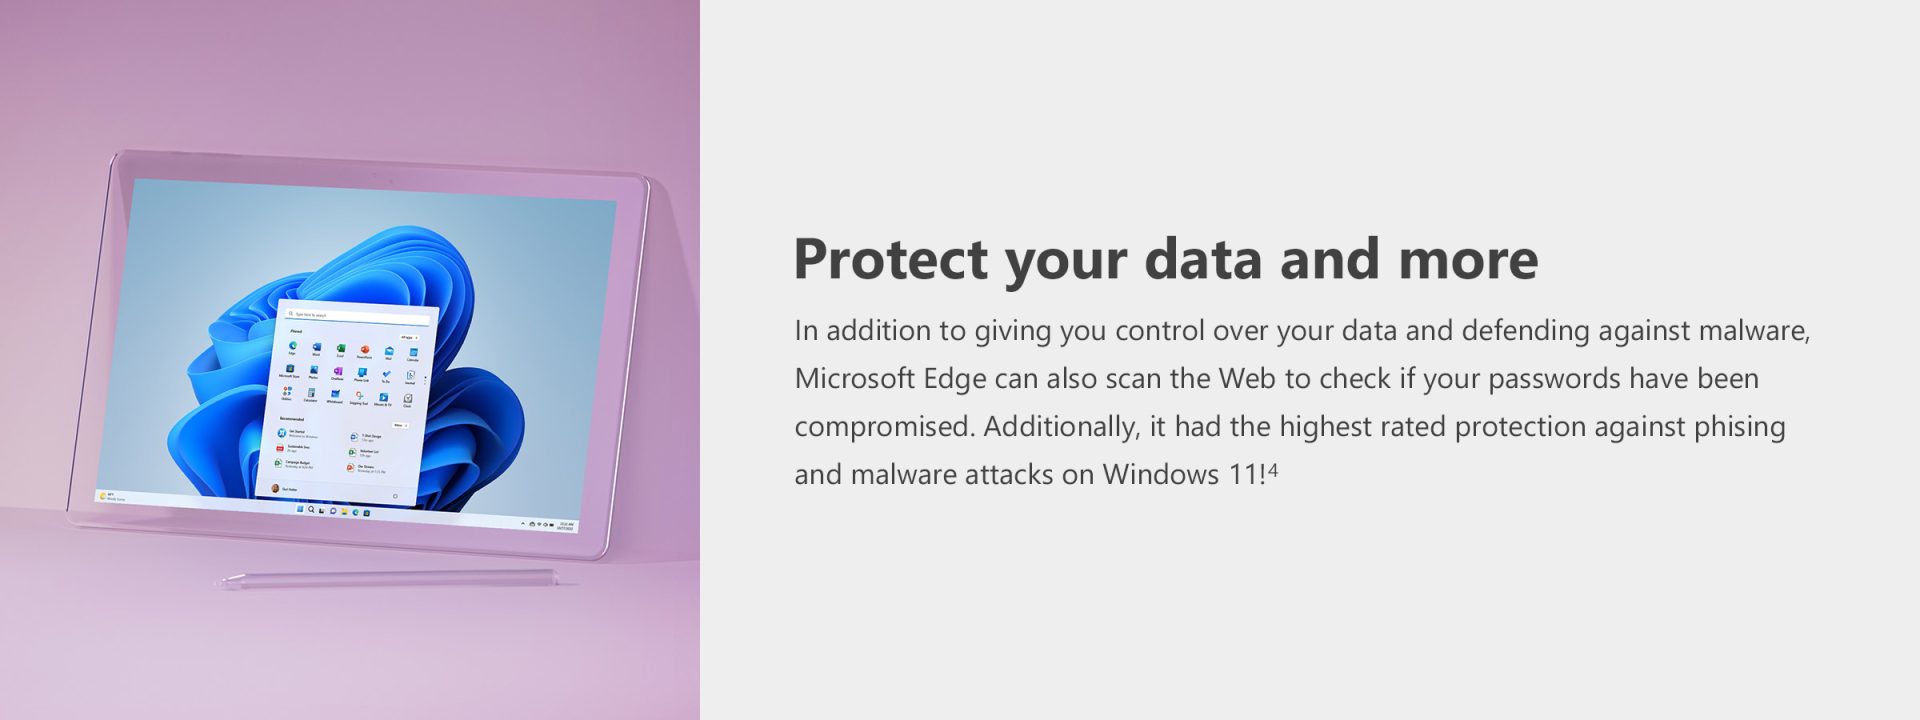 Windows 11 - Protect your data and more